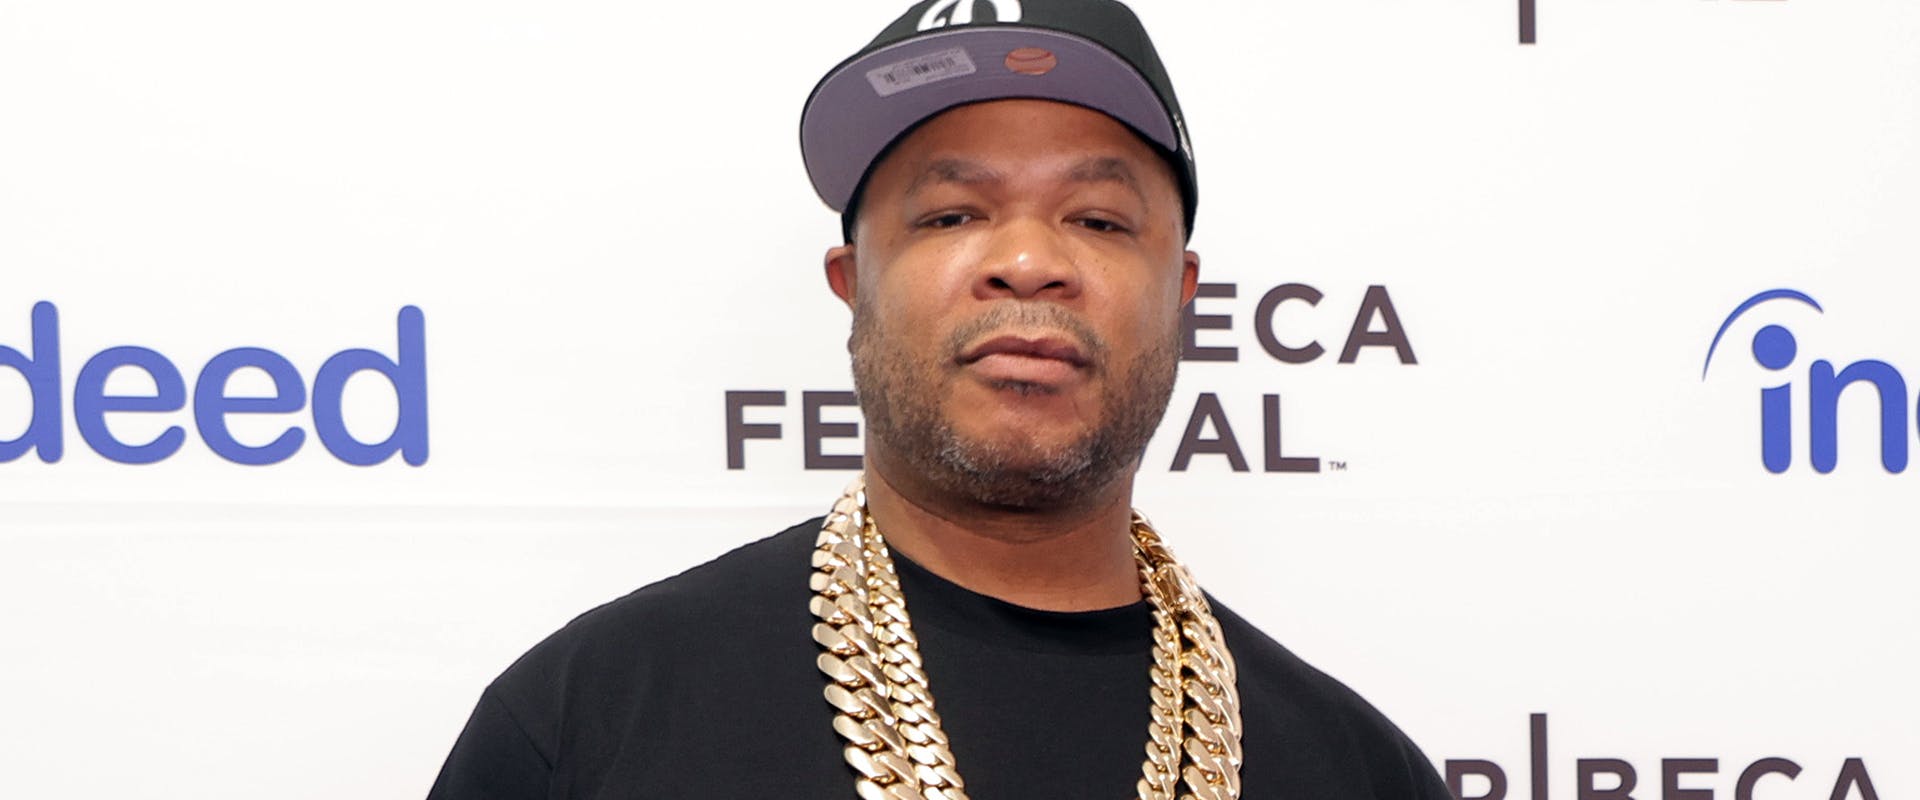 Xzibit Says There's No 'Staying Power' in Current Hip-Hop